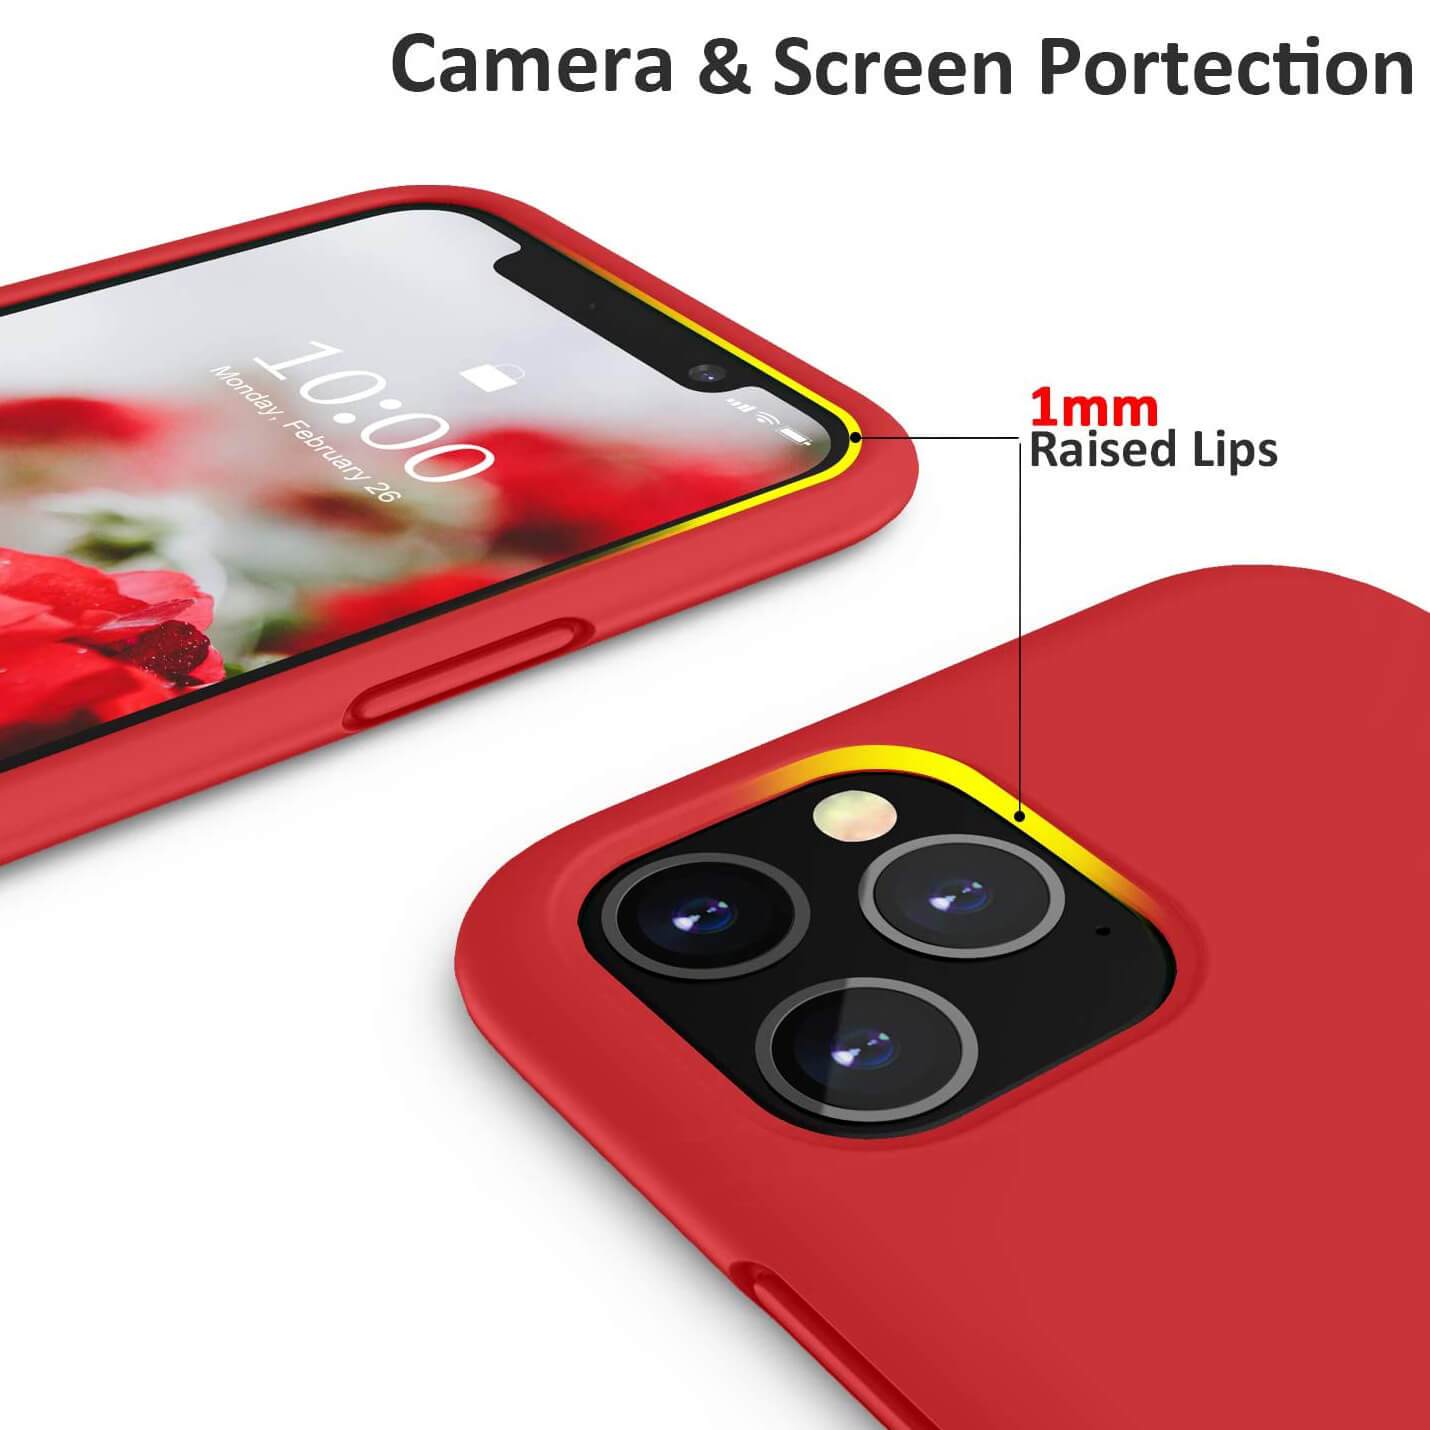 Liquid Silicone Case For Apple iPhone 11 Pro Max Luxury Thin Phone Cover Red